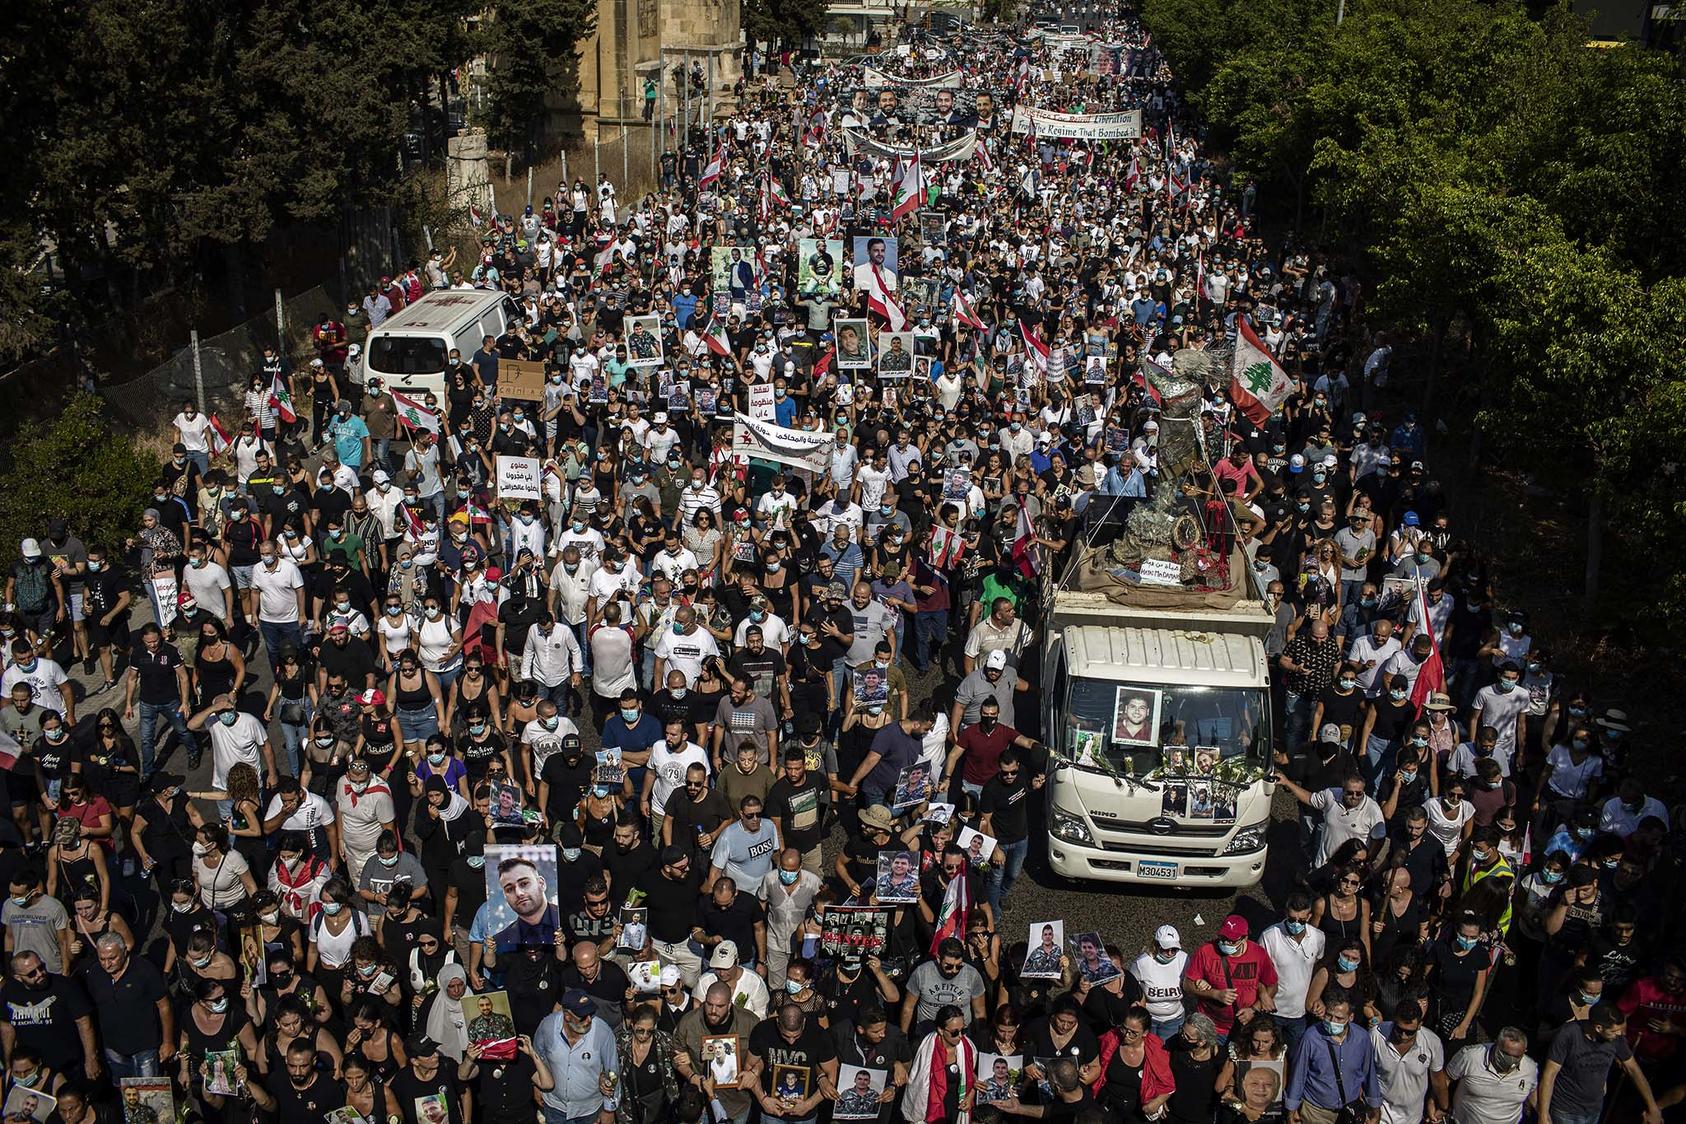 Mourners march in Beirut, Lebanon on Wednesday, Aug. 4, 2021, to commemorate the one-year anniversary of the catastrophic port explosion in Beirut that killed more than 200 people. (Diego Ibarra Sanchez/The New York Times)